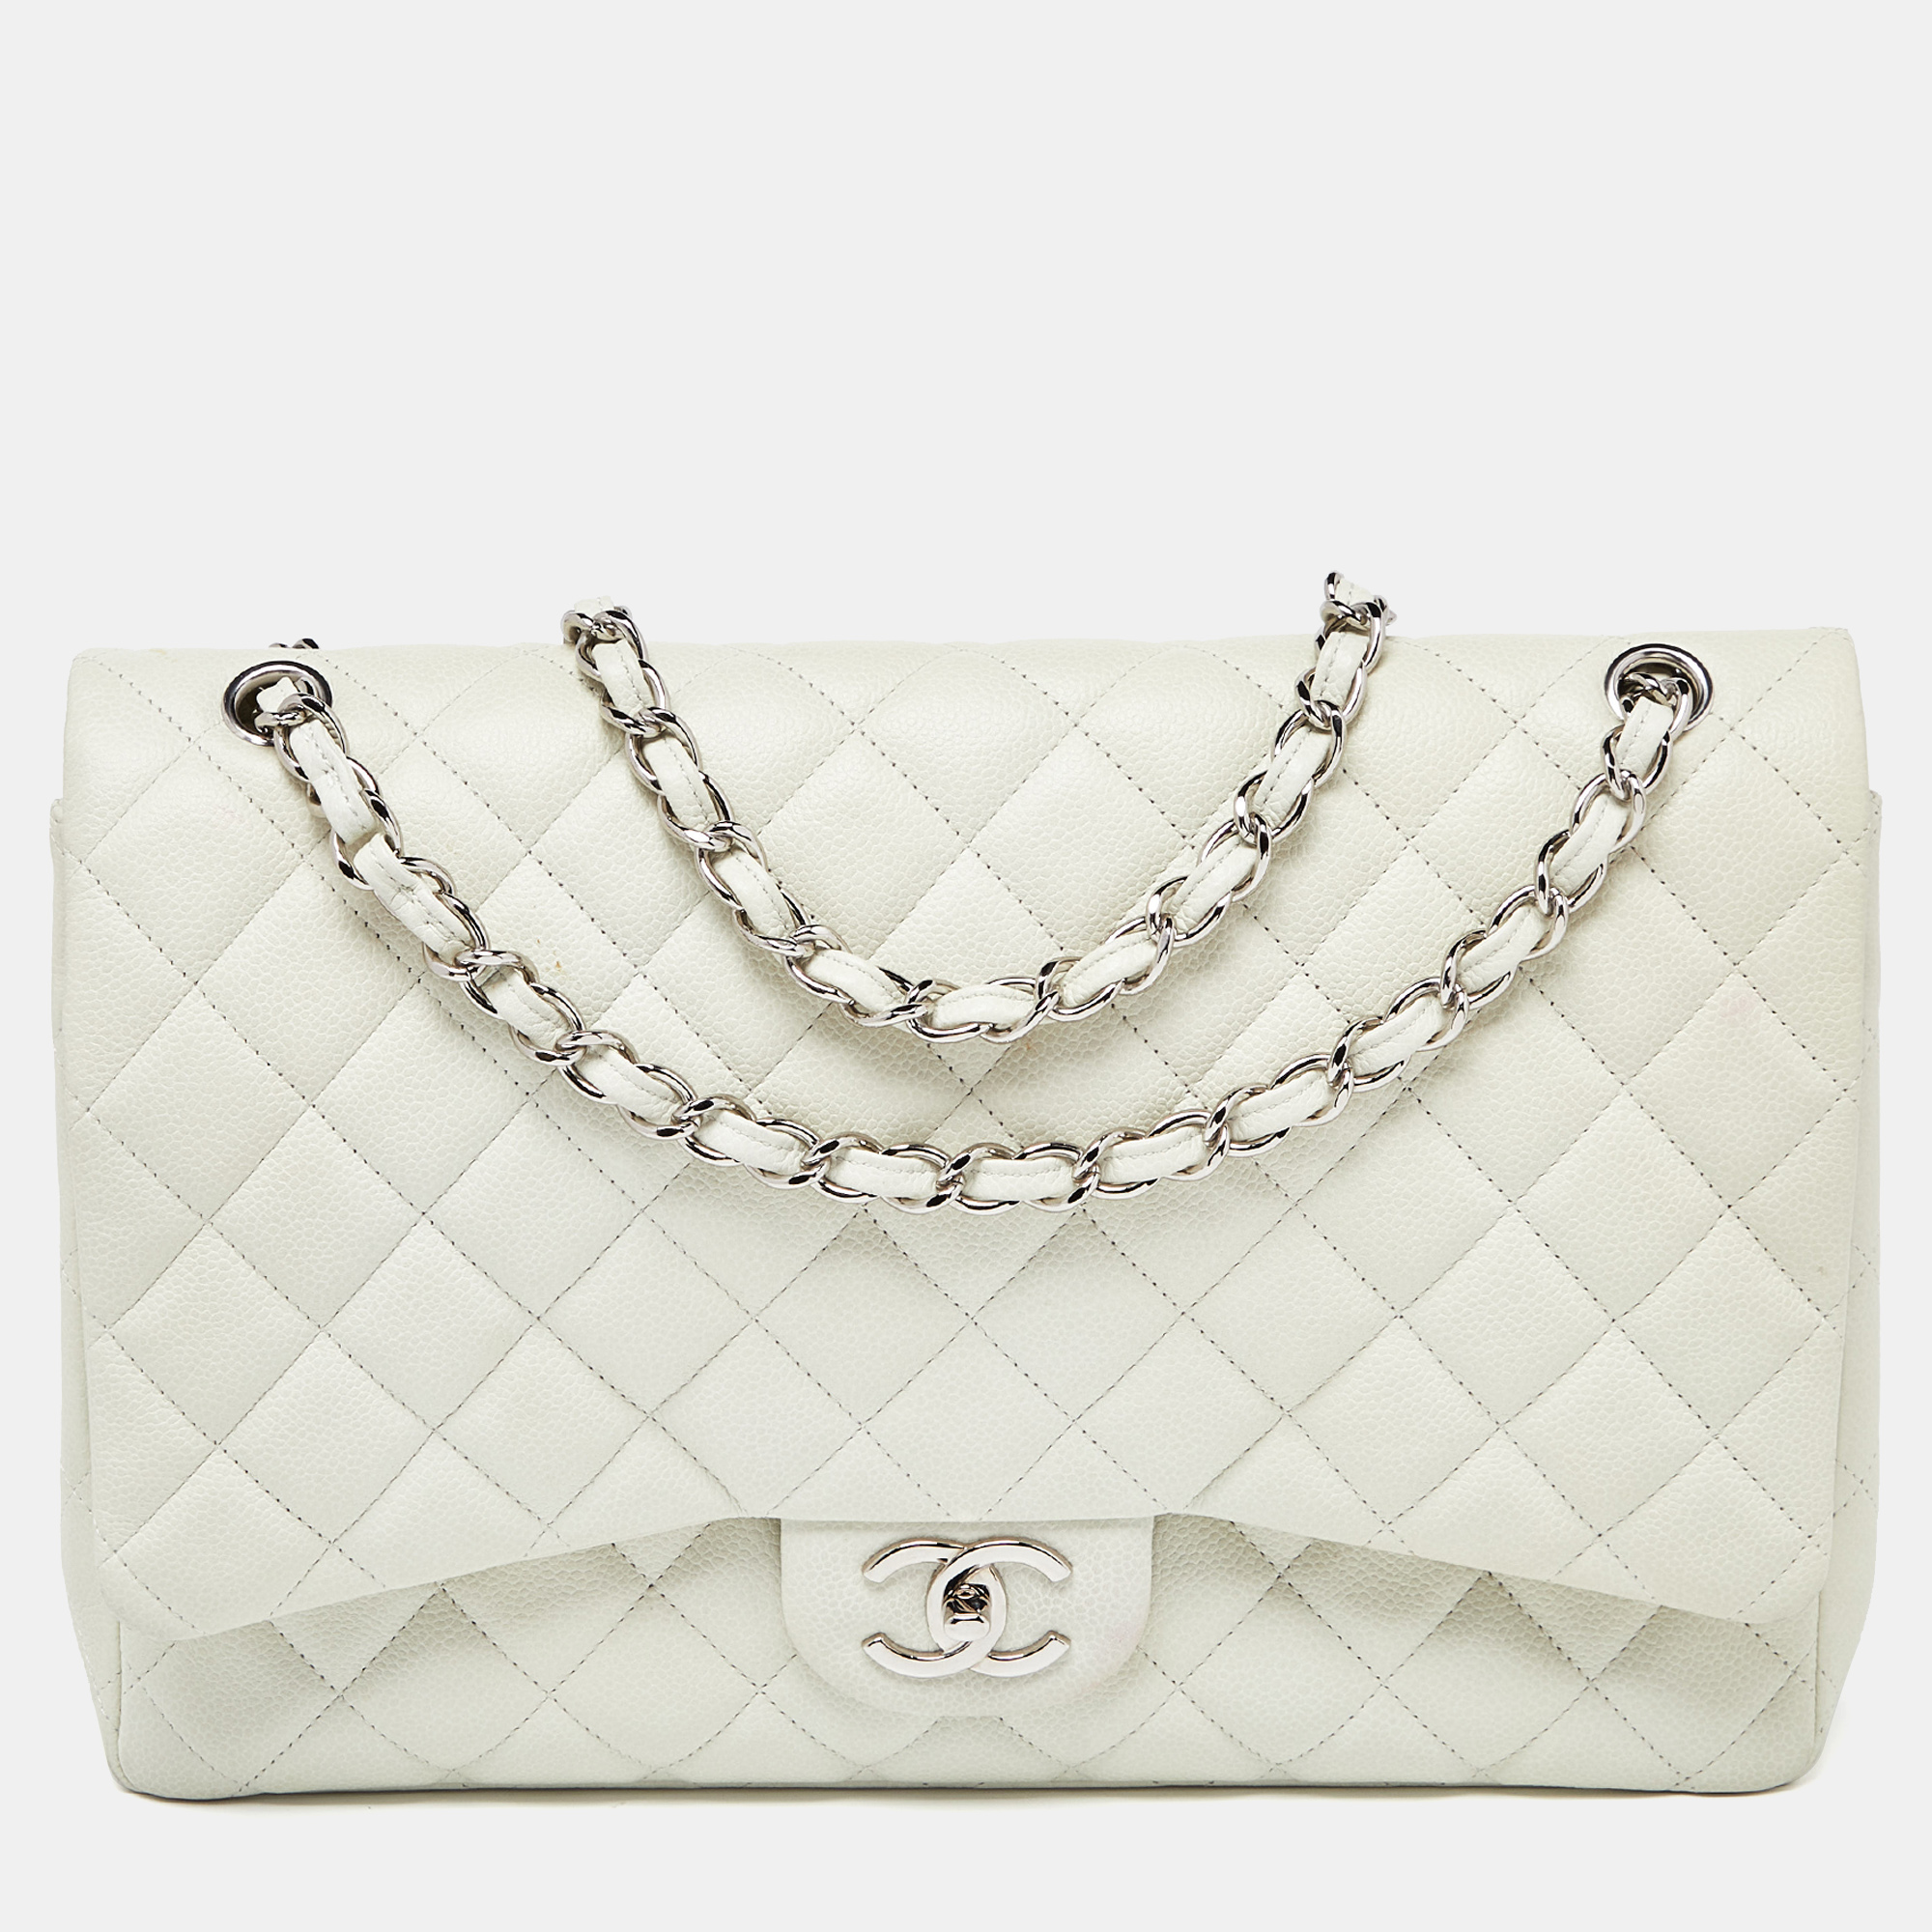 Chanel off white quilted caviar leather maxi classic double flap bag